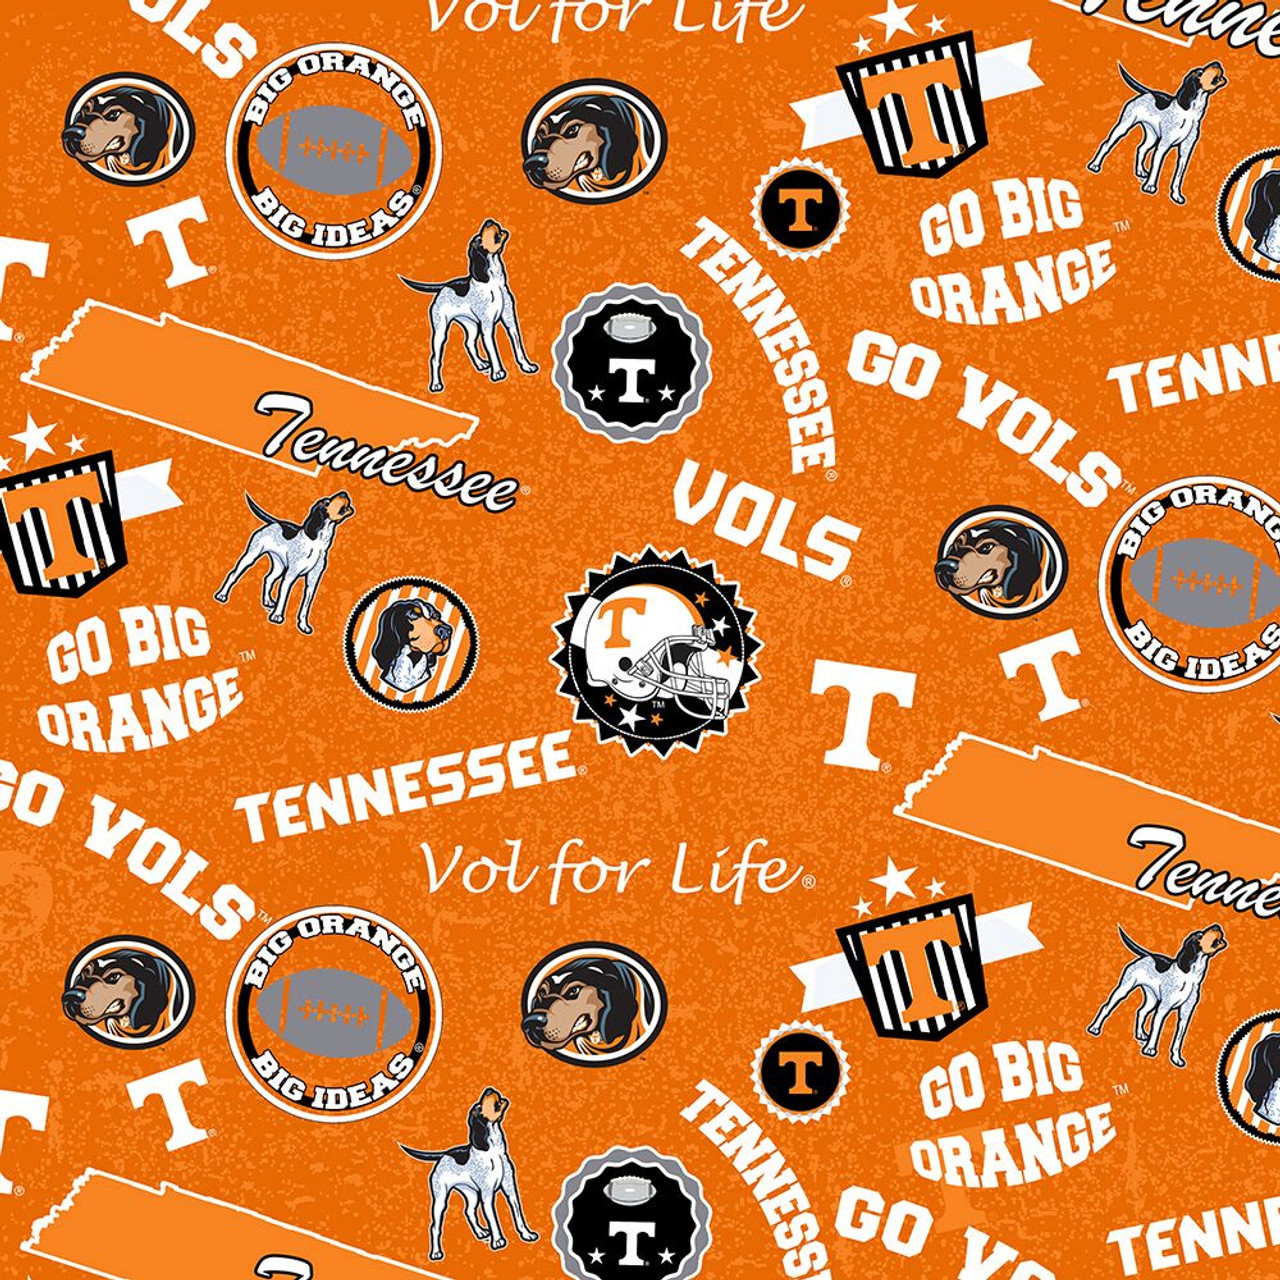 University of Tennessee Volunteers Cotton Fabric with Home State Print or Matching Solid Cotton Fabrics